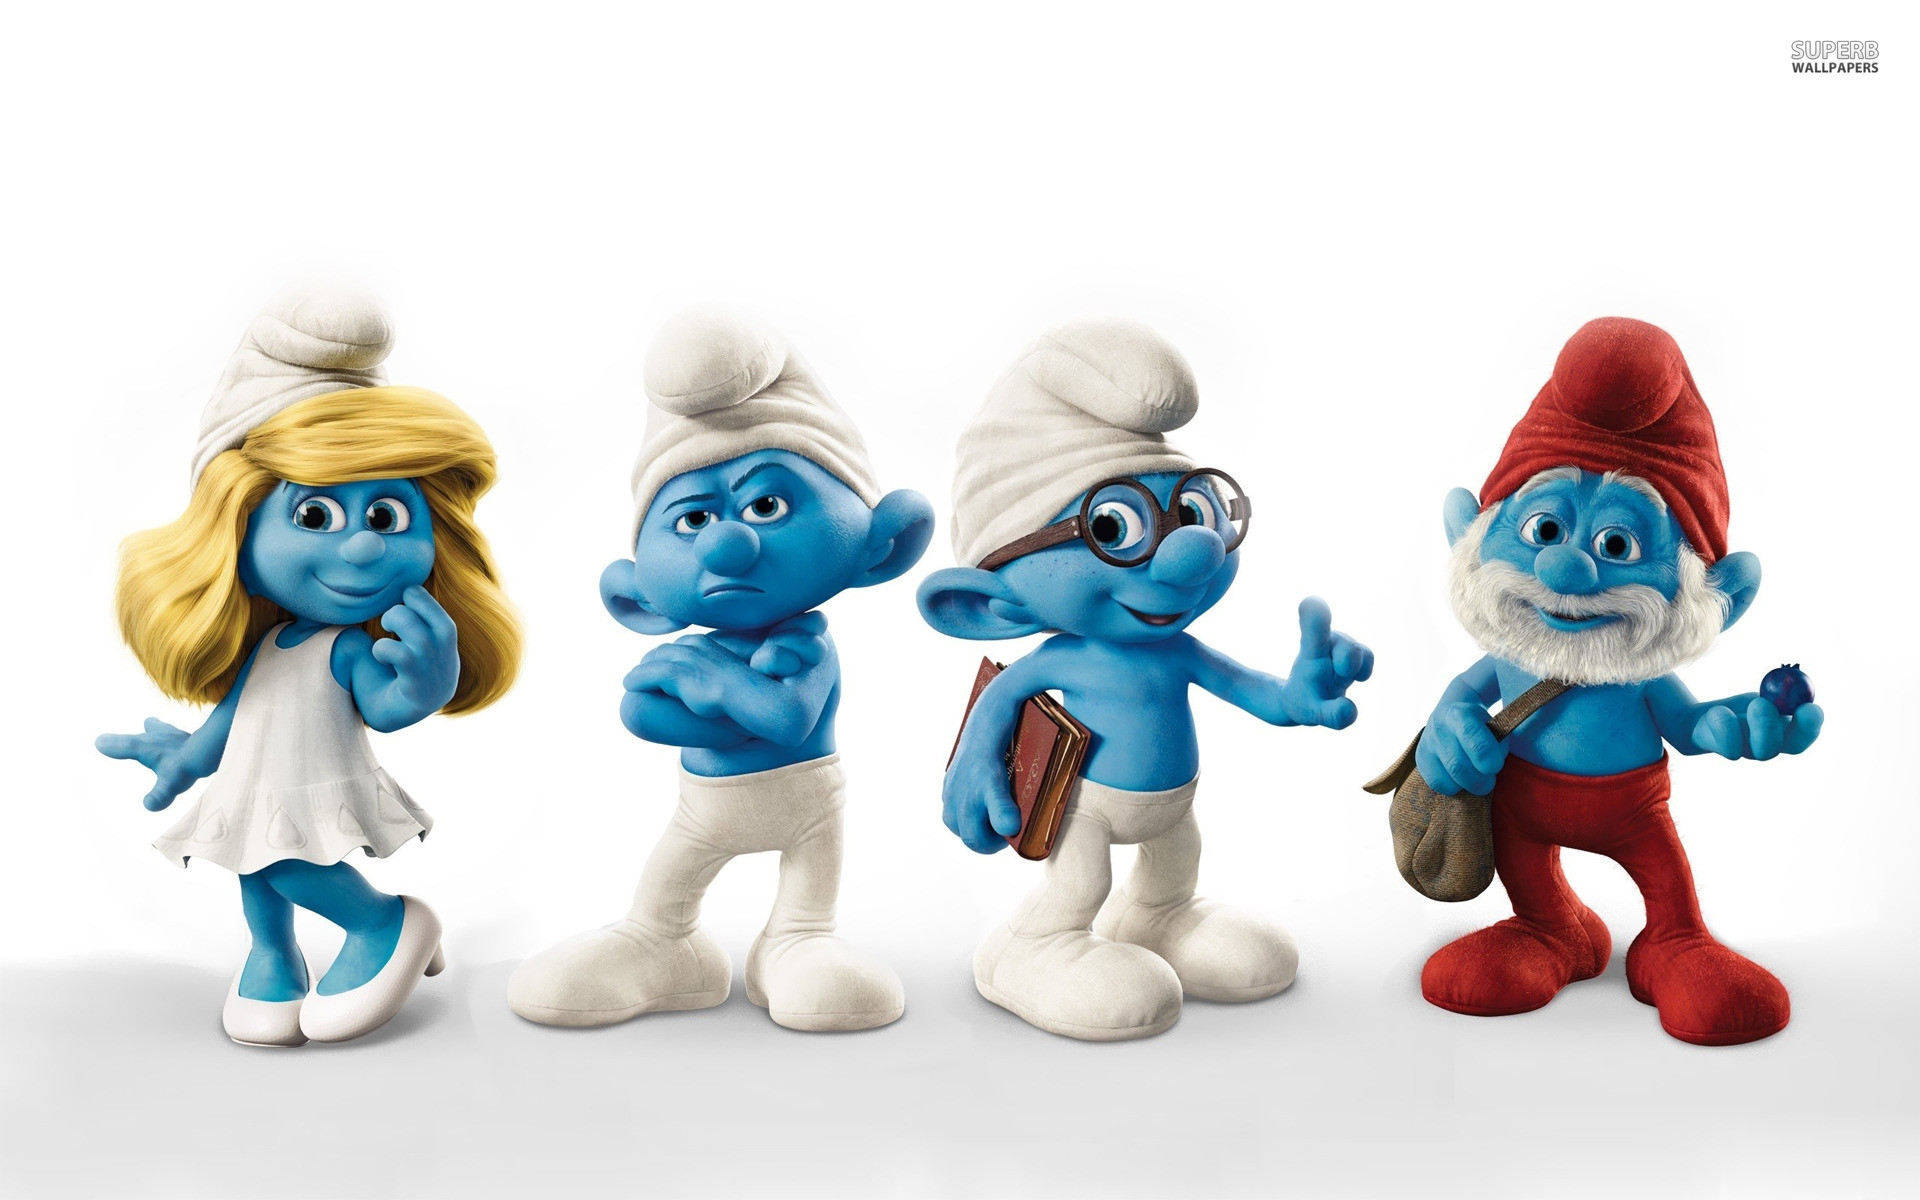 1920x1200 The Smurfs Image for FB Cover